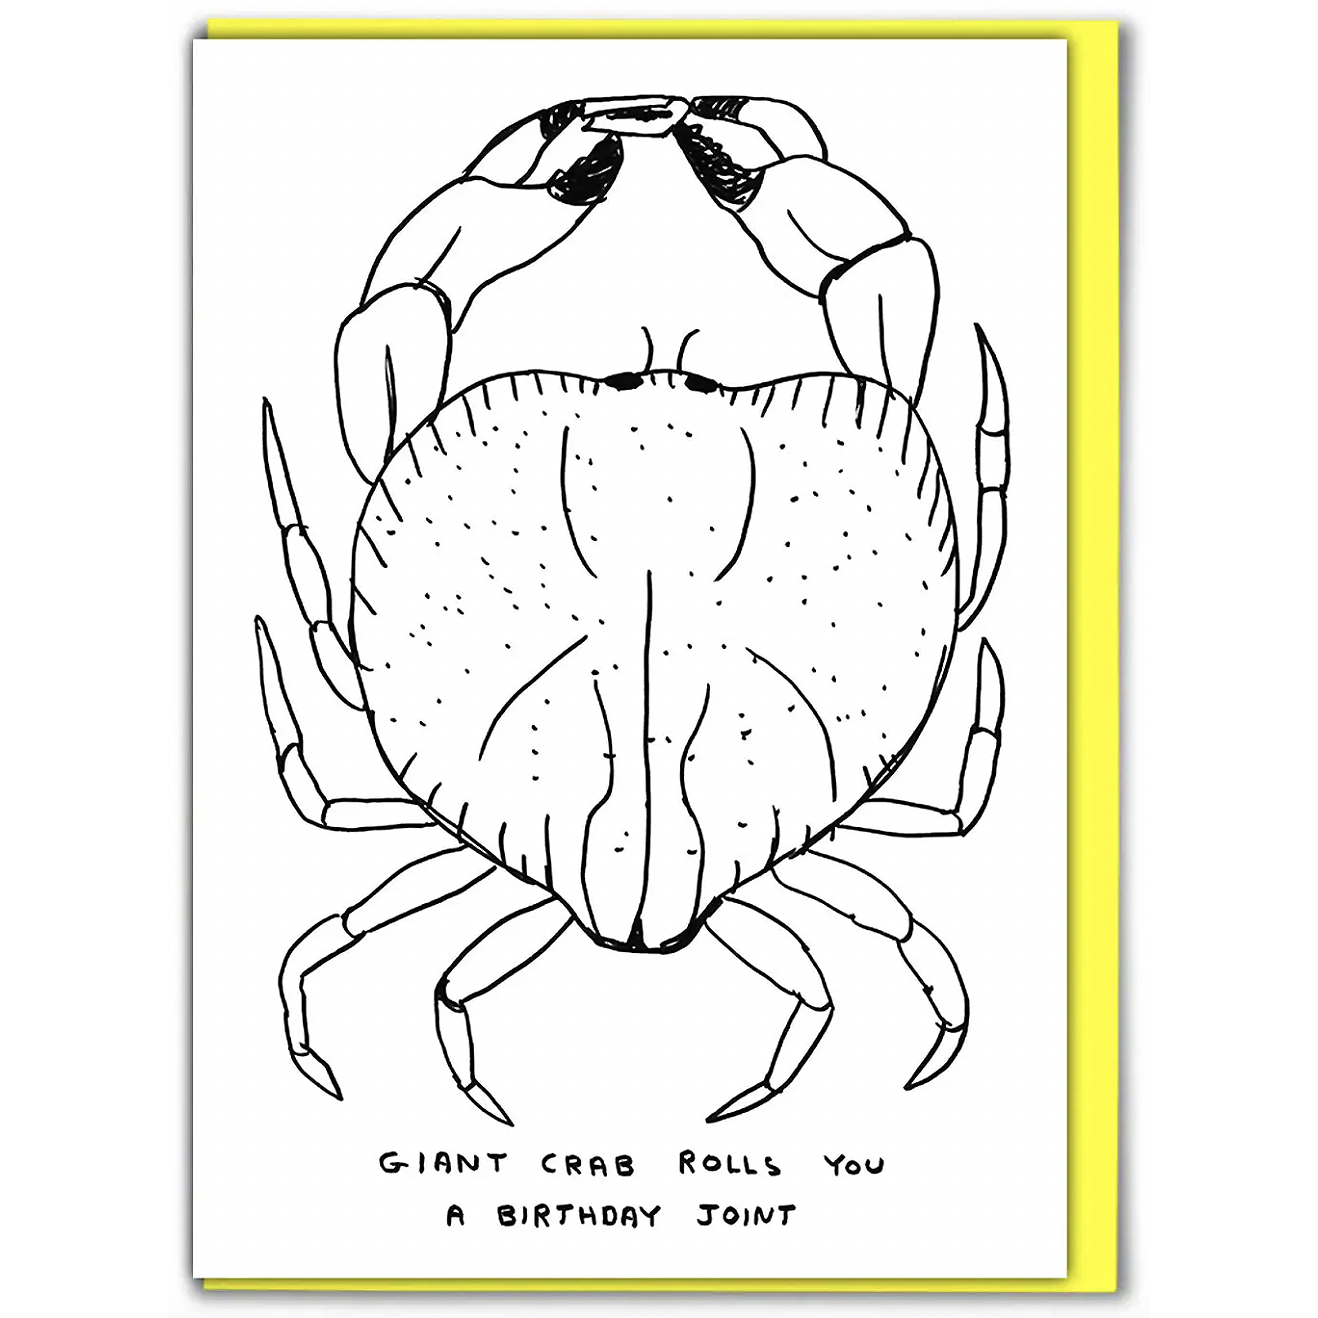 Giant Crab Rolls You A Birthday Joint Card